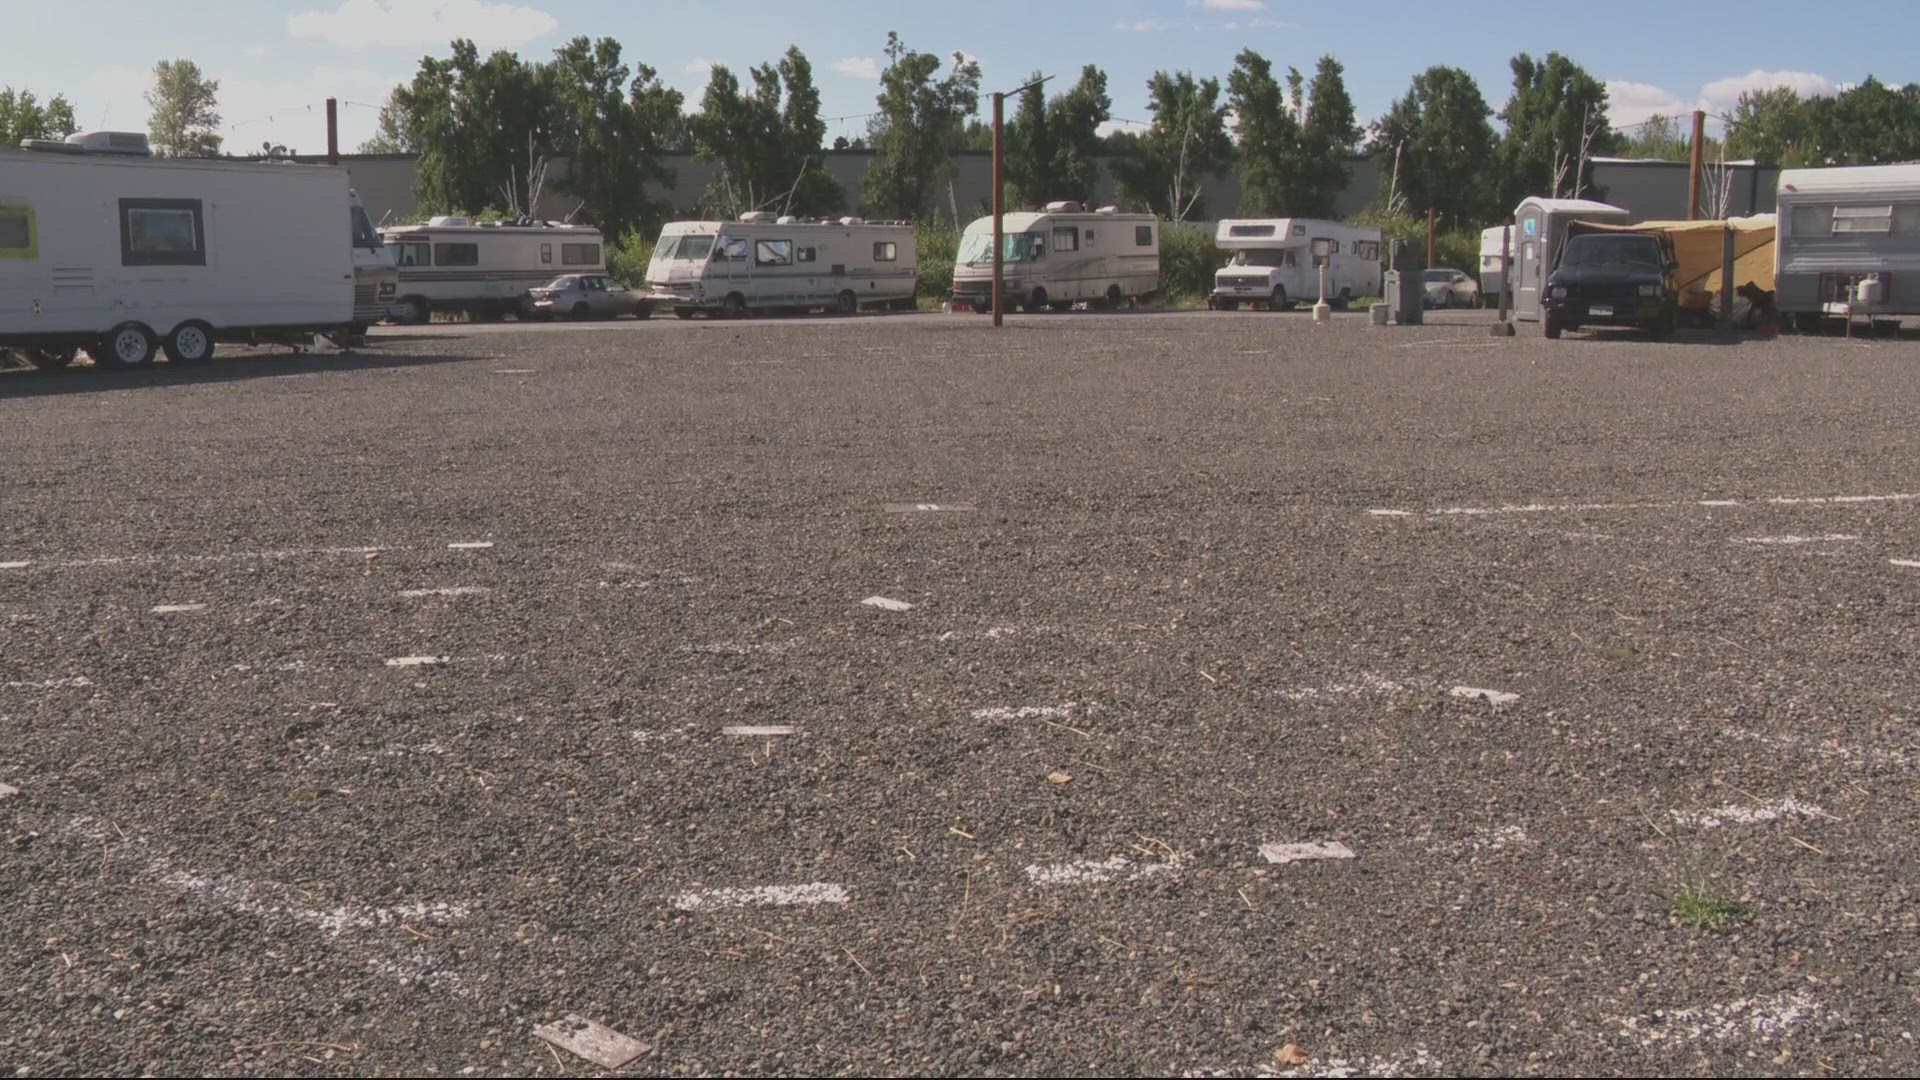 The city-sanctioned Safe Rest Park located in Northeast Portland can hold 55 vehicles. It's holding 25 residents currently. Dozens of homeless people live in broken-